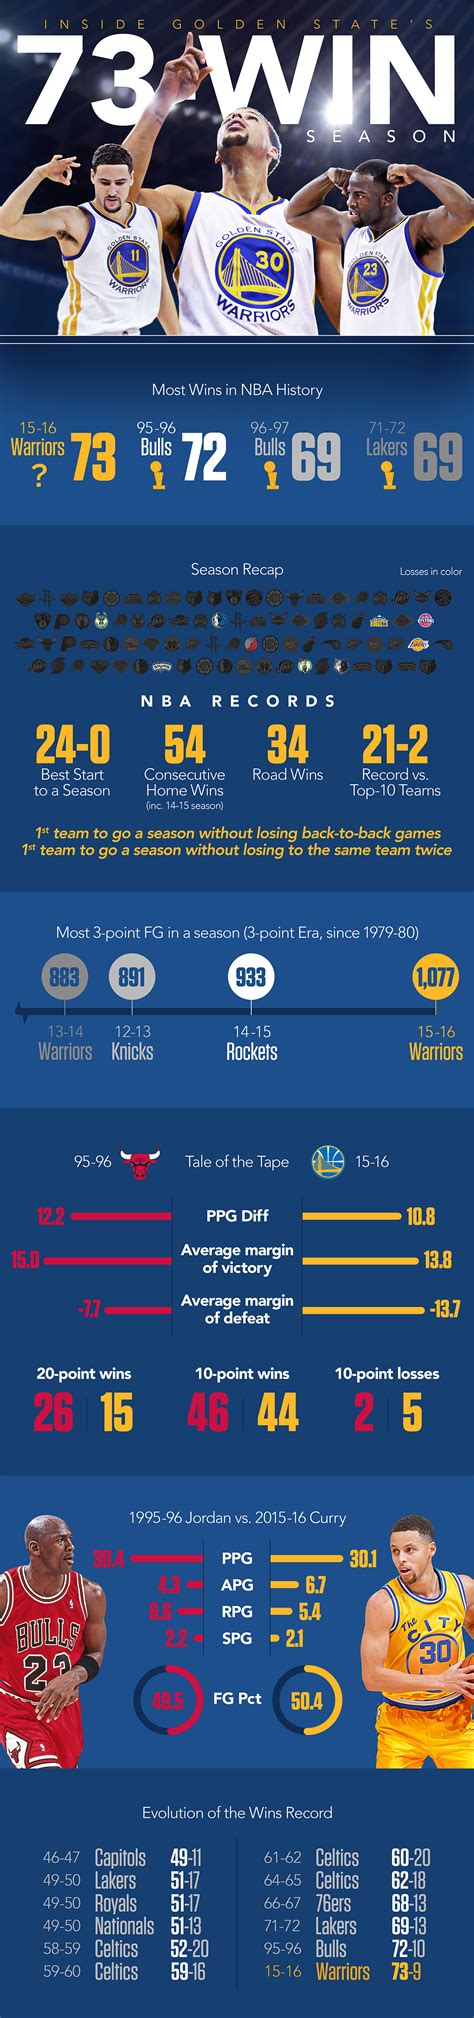 Warriors espn stats - 76ers. Visit ESPN for Philadelphia 76ers live scores, video highlights, and latest news. Find standings and the full 2023-24 season schedule.